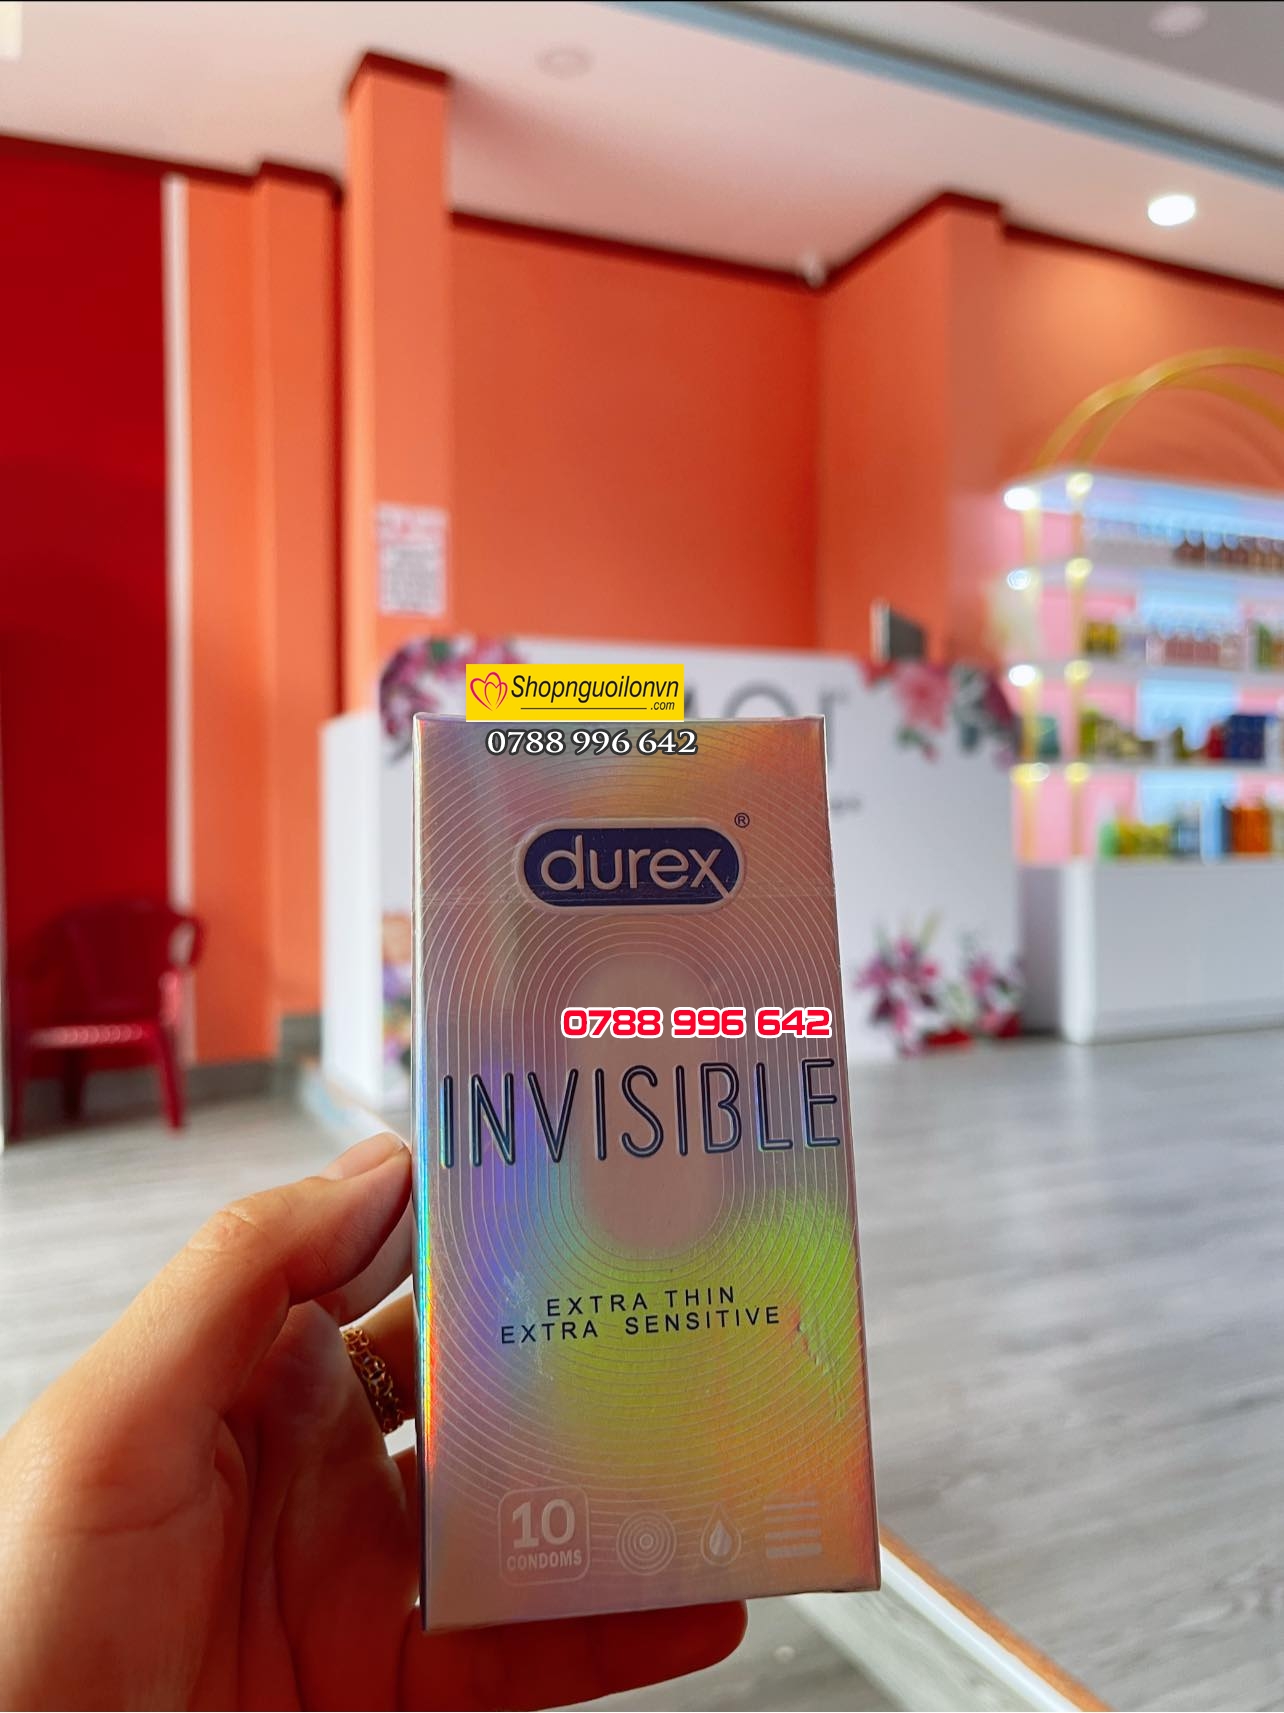 You are currently viewing Bao Cao Su Durex Invisible Hải Phòng